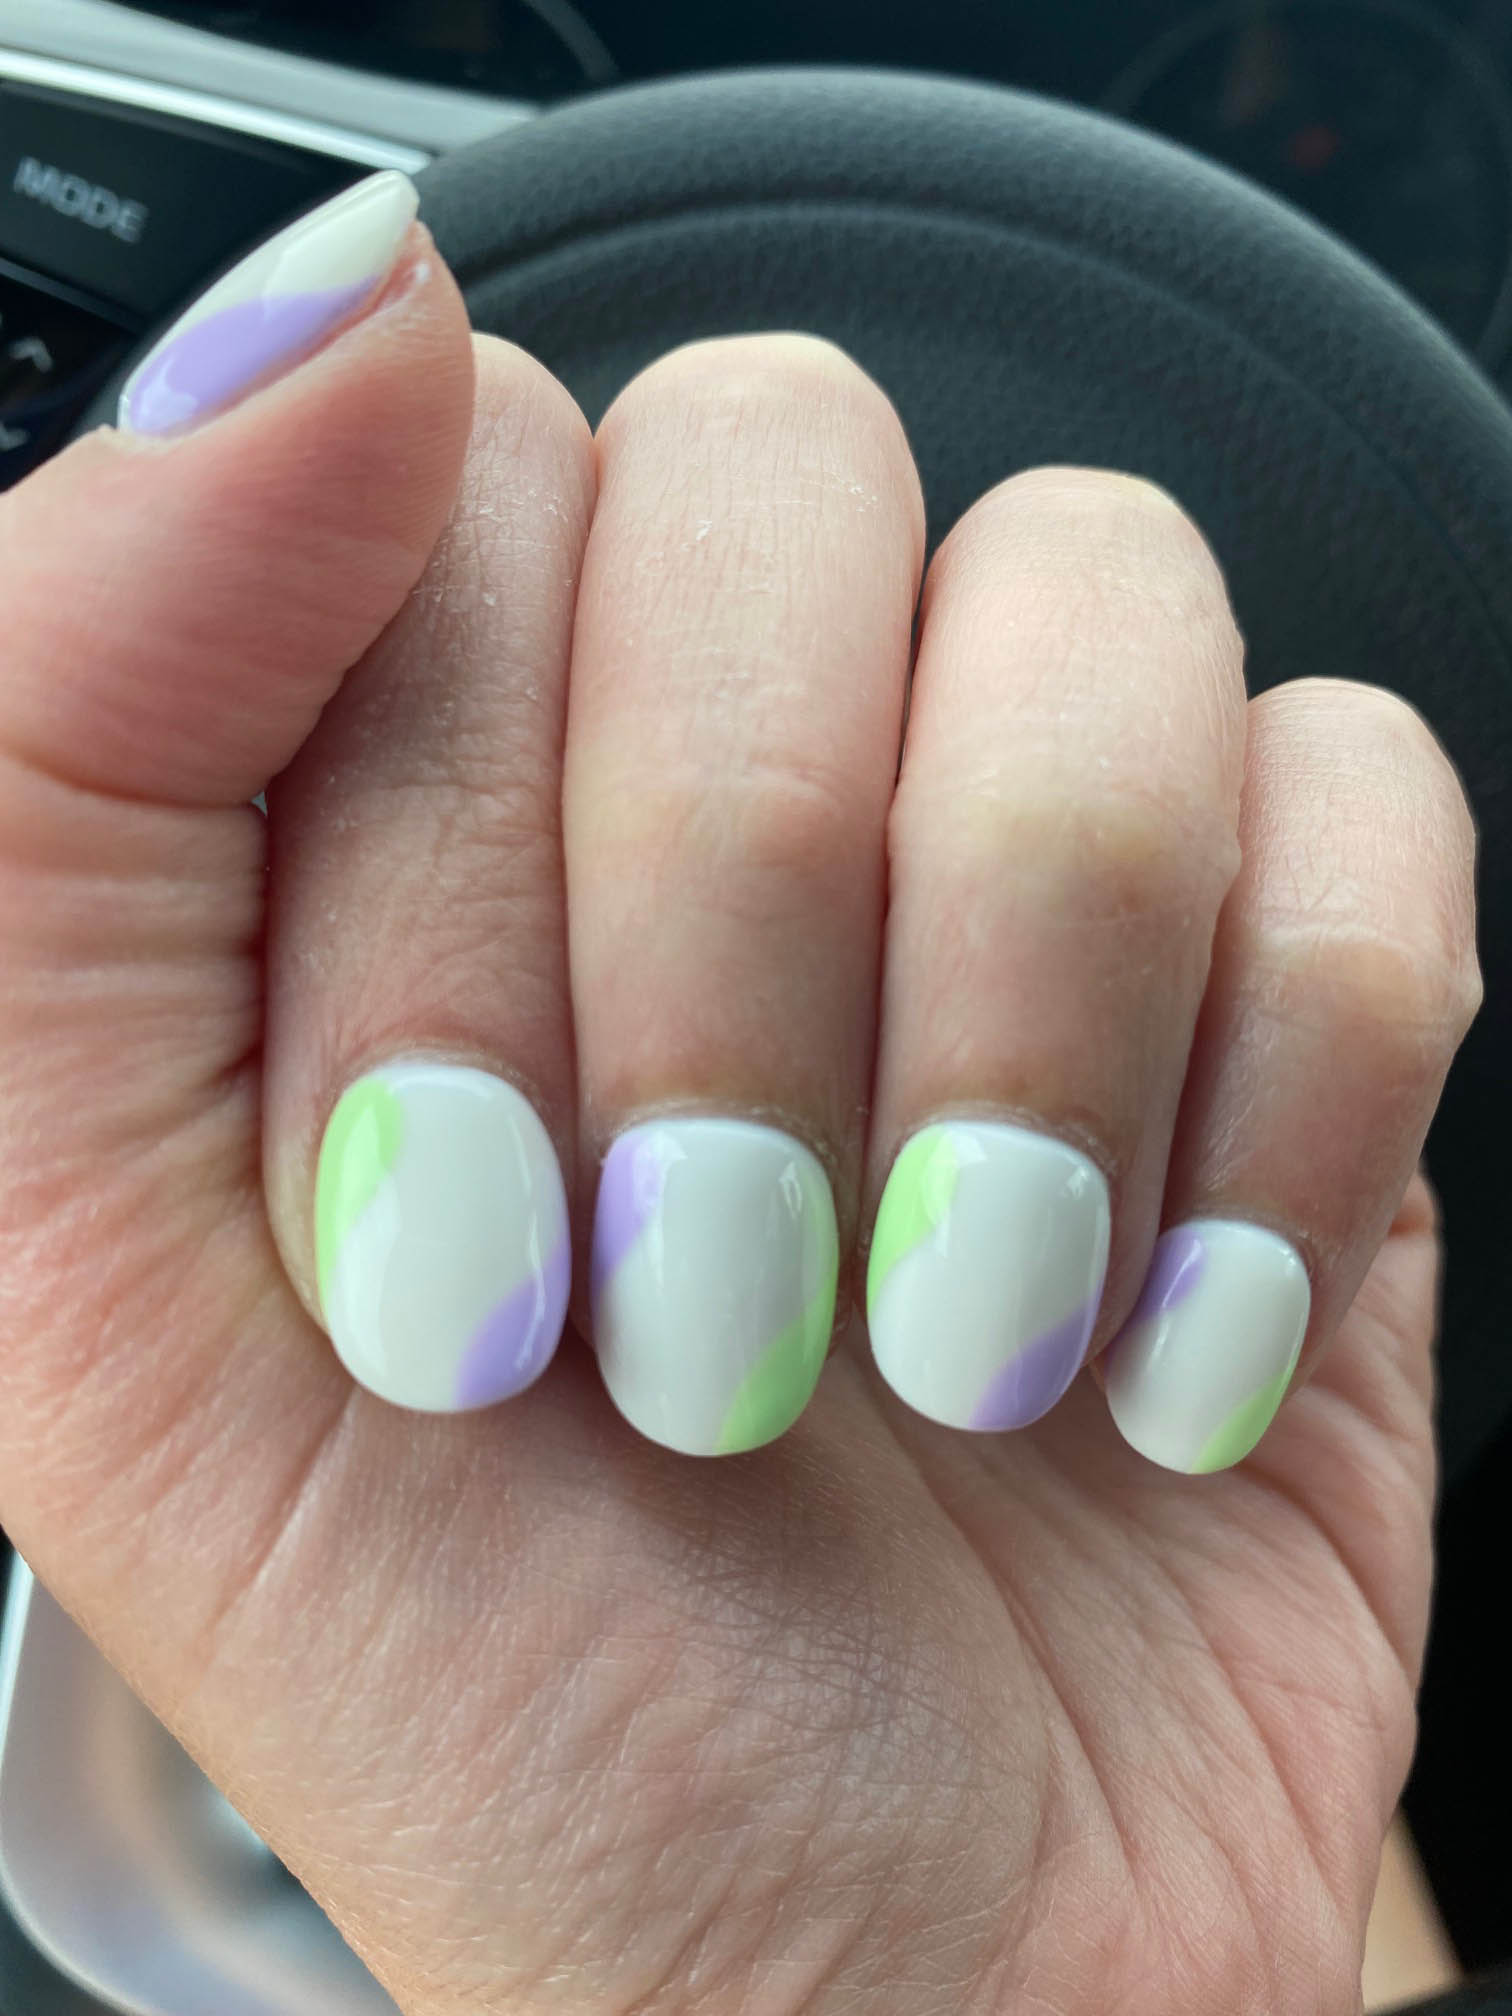 Simple White Nails Design With Light Purple Green Color Block Tutorial